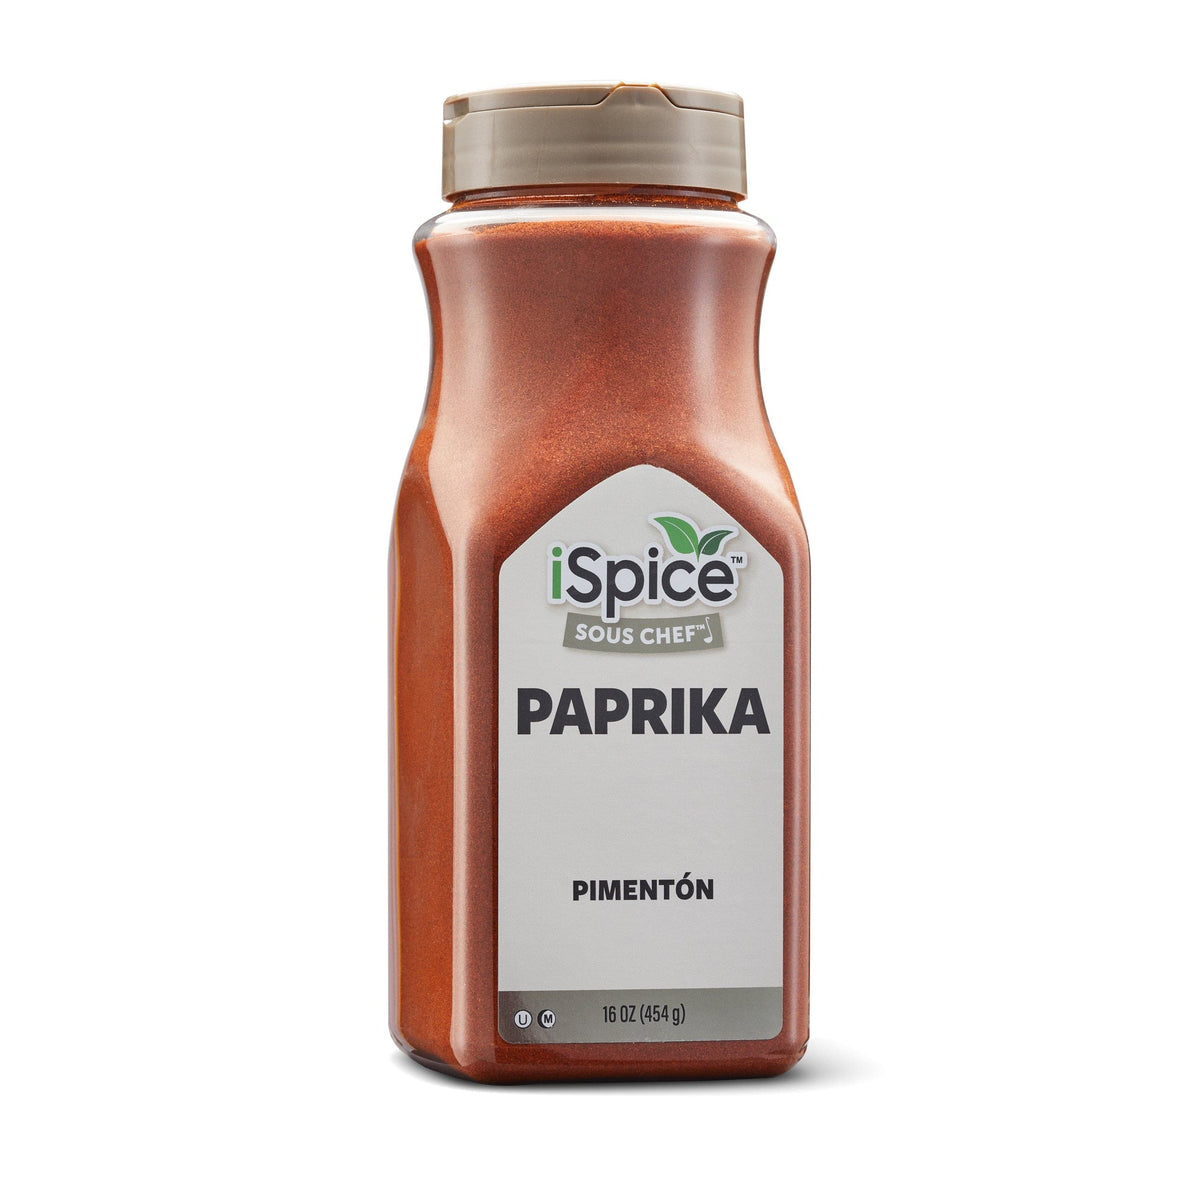 Make every meal delicious with our paprika! Our spices are prepared with only fresh and top-quality ingredients, perfect for any dish.